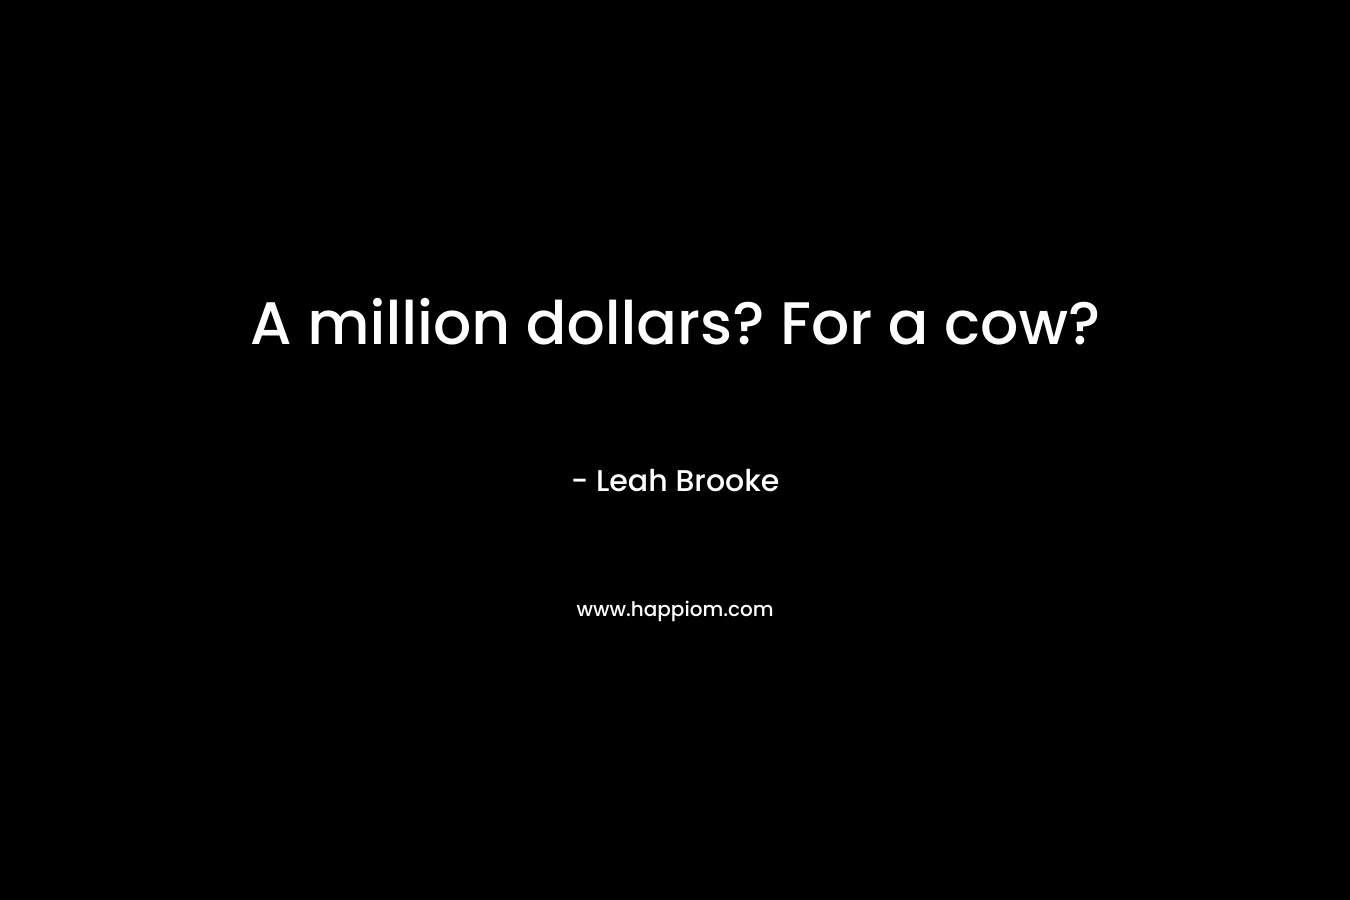 A million dollars? For a cow? – Leah Brooke